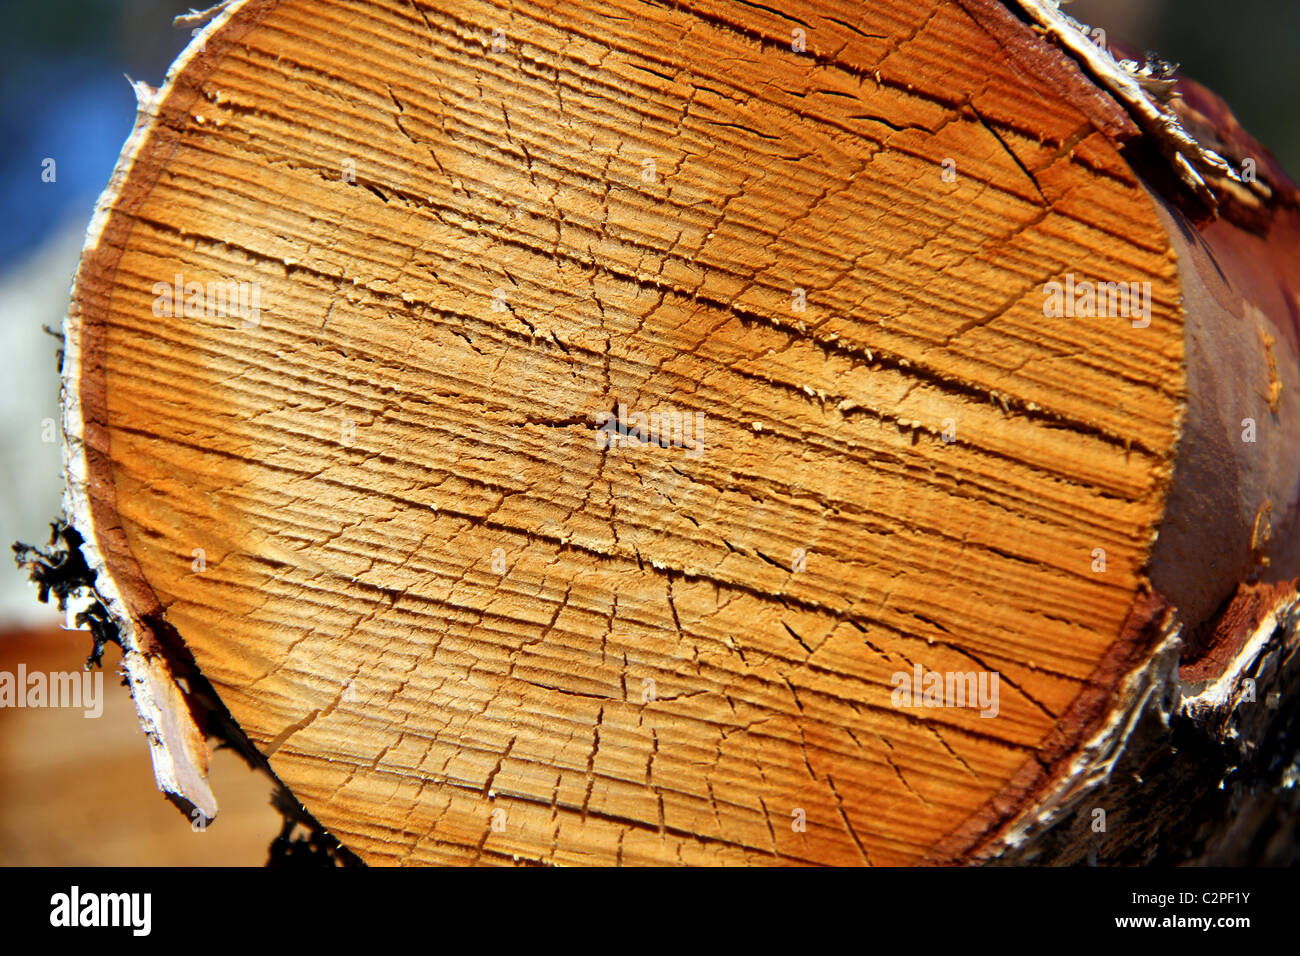 Colorful Birch Log Close Up Stock Photo